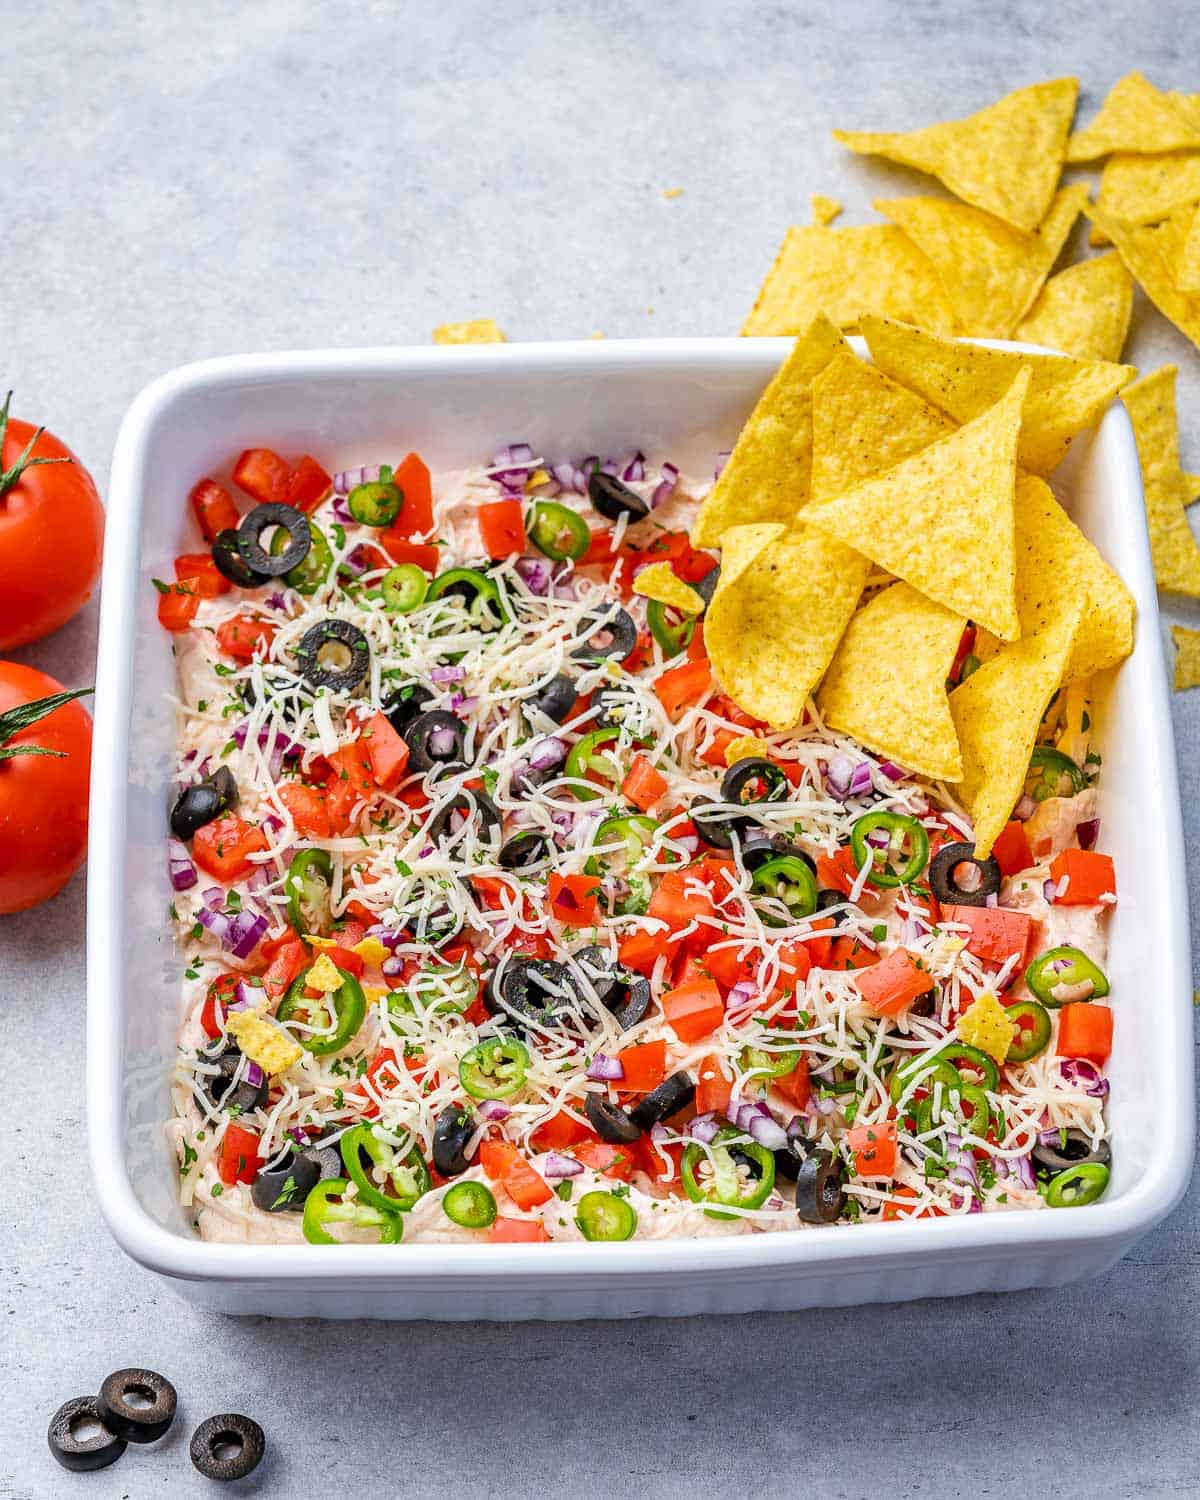 Taco dip topped with black olives, diced tomatoes, green onions and cheese.